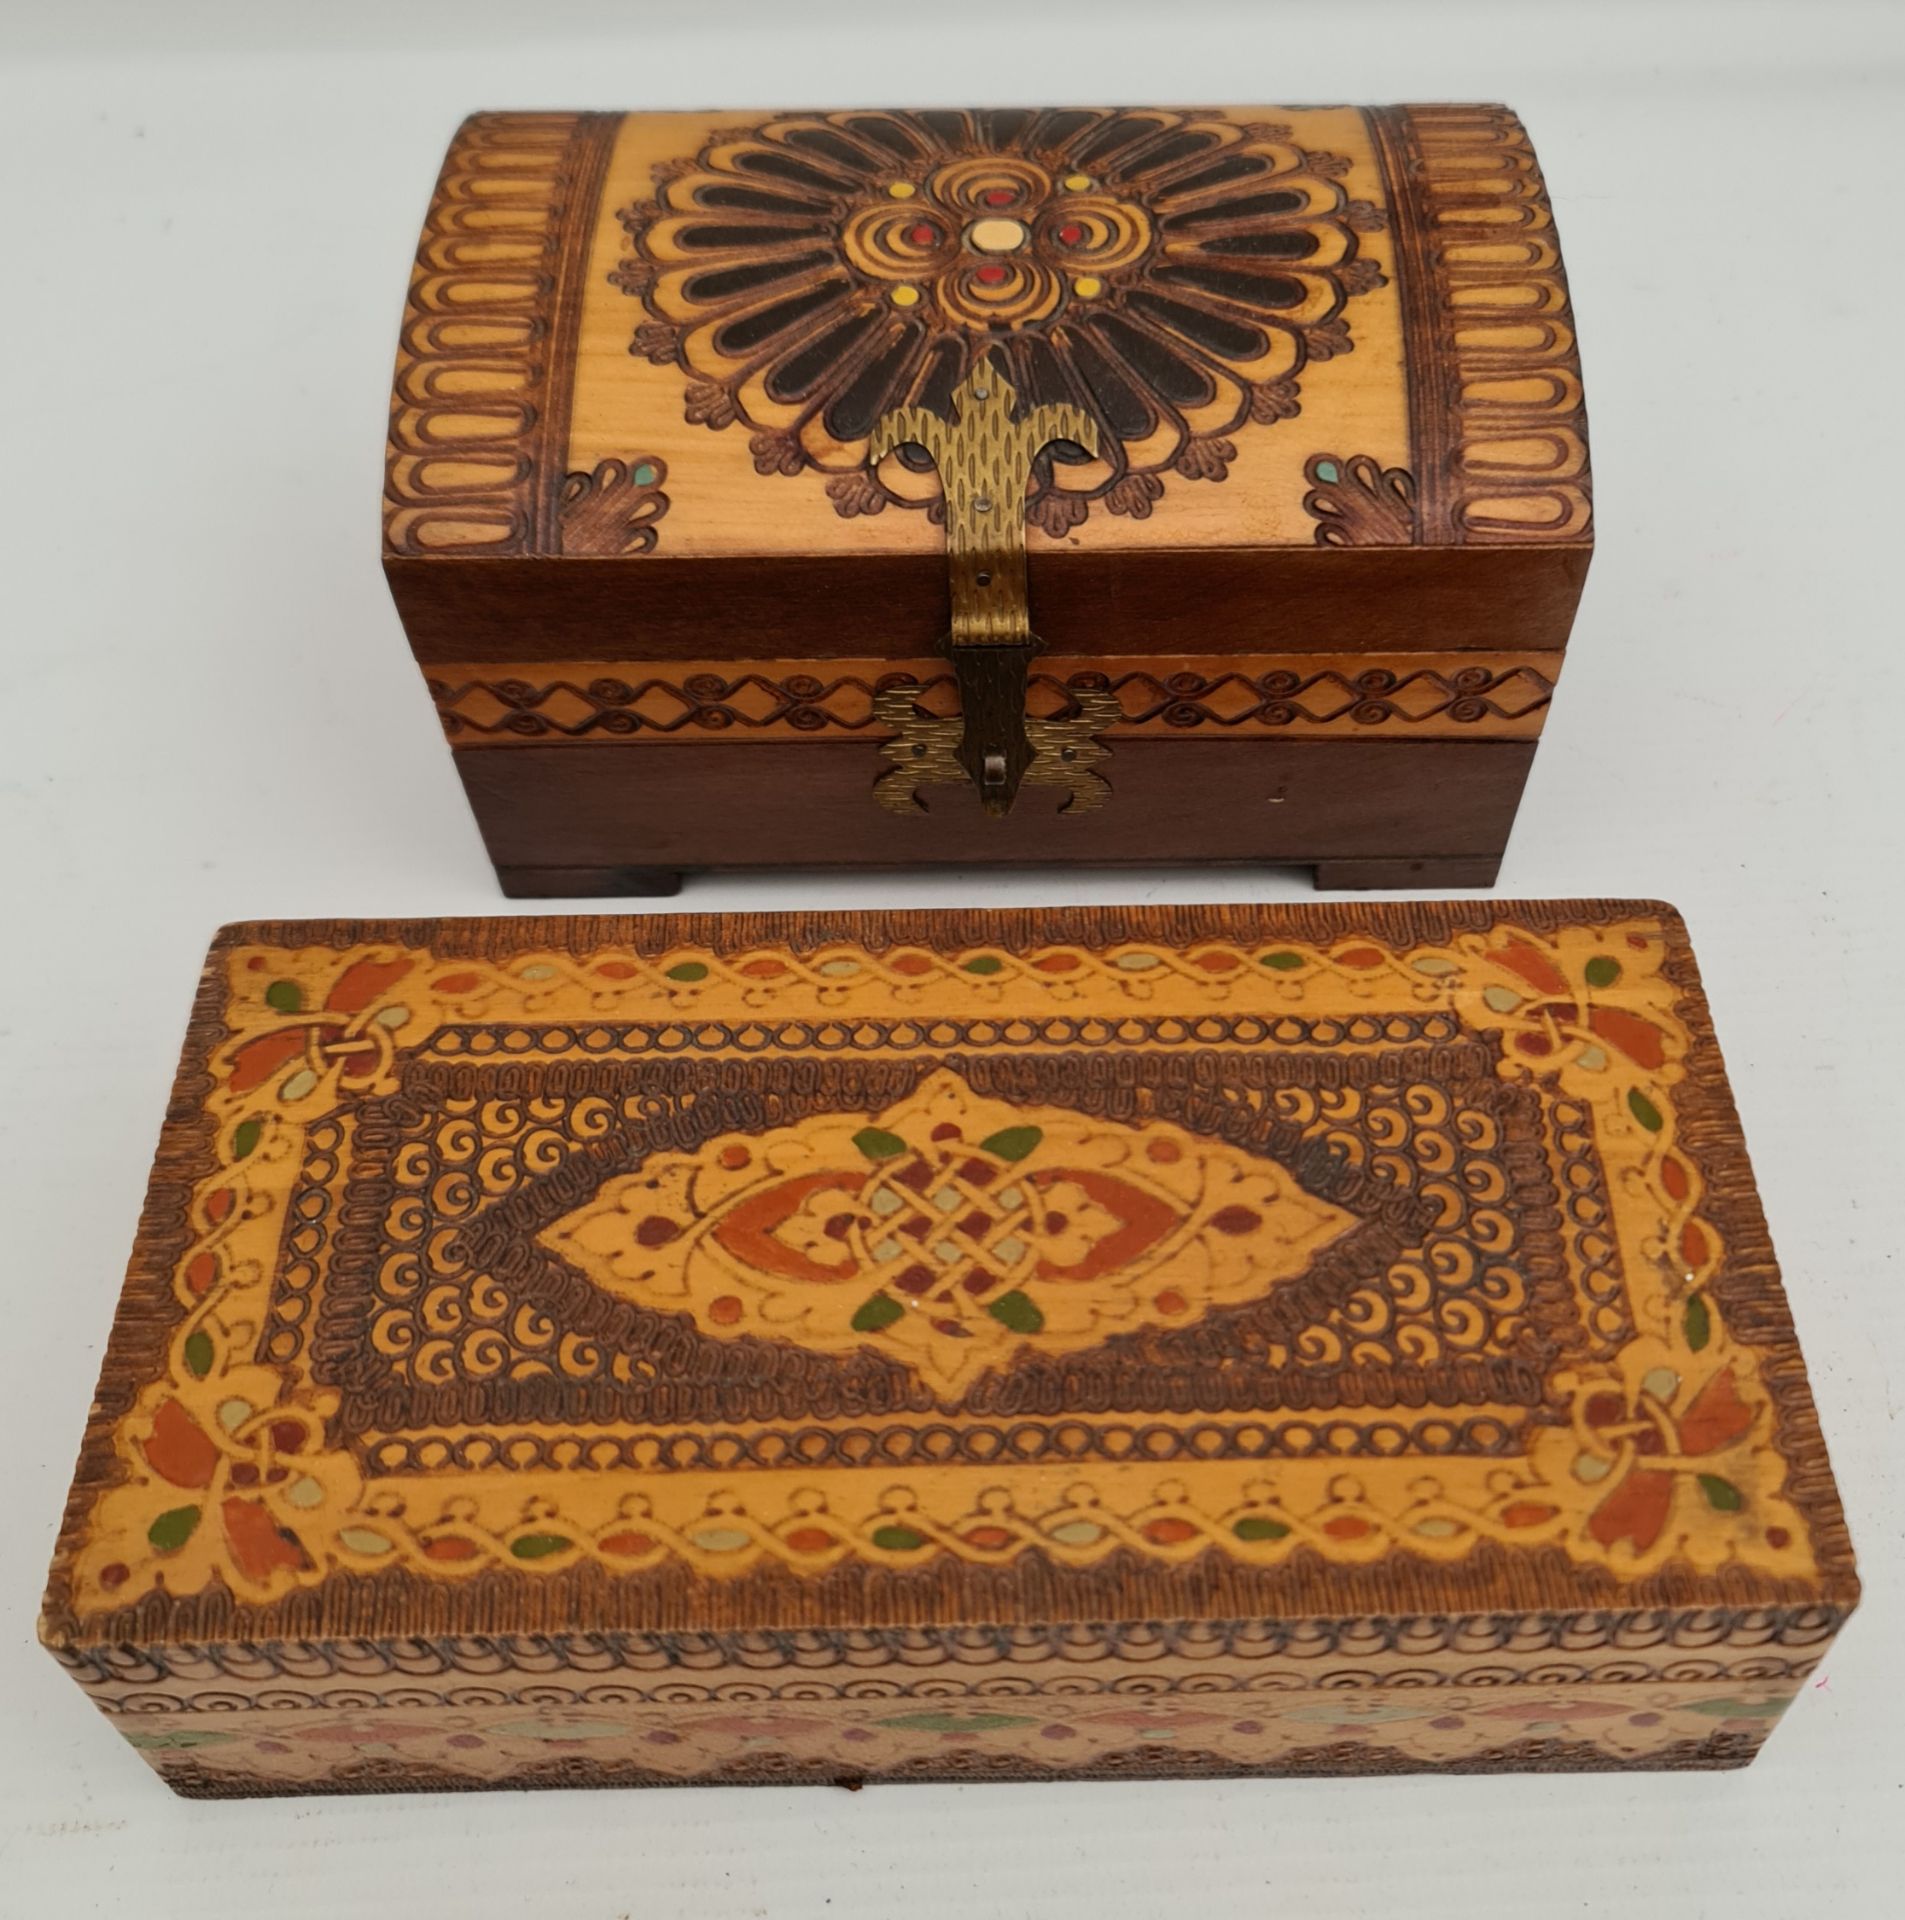 Vintage 2 x Wooden Poker Work and Inked Boxes Vintage 2 x Wooden Poker Work and Inked Boxes.One